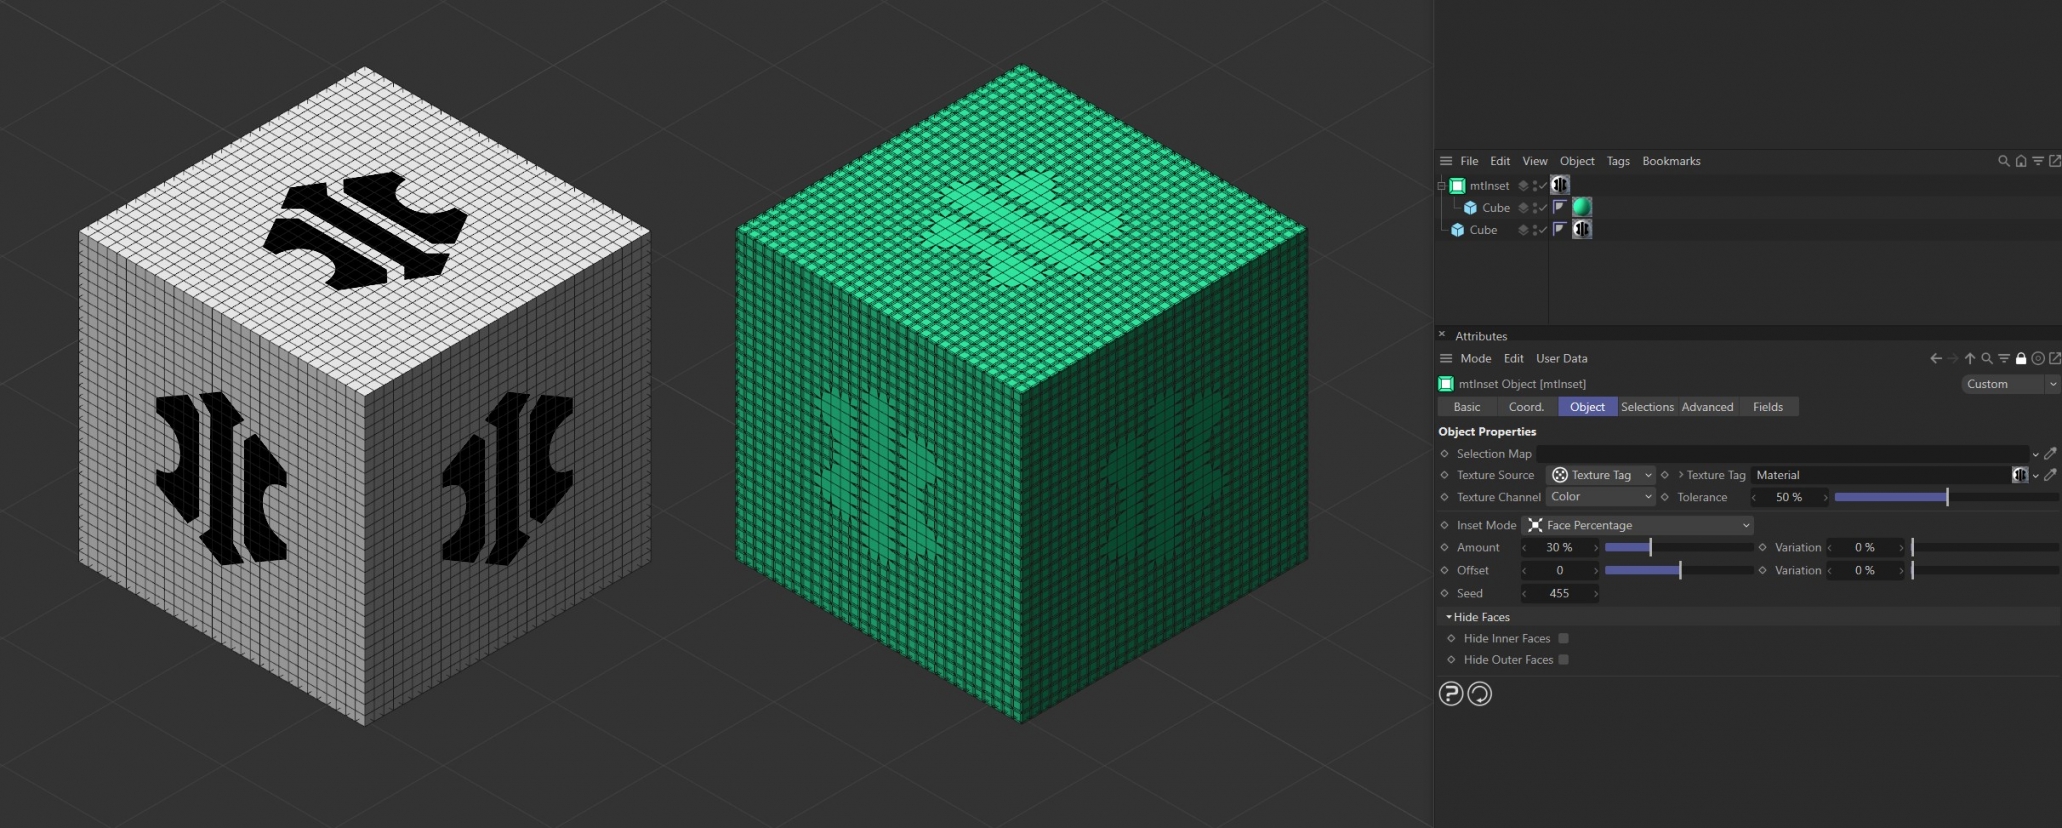 Texture Source set to Texture Tag, with the bitmap material on the left driving the inset generation on the right-hand Cube.